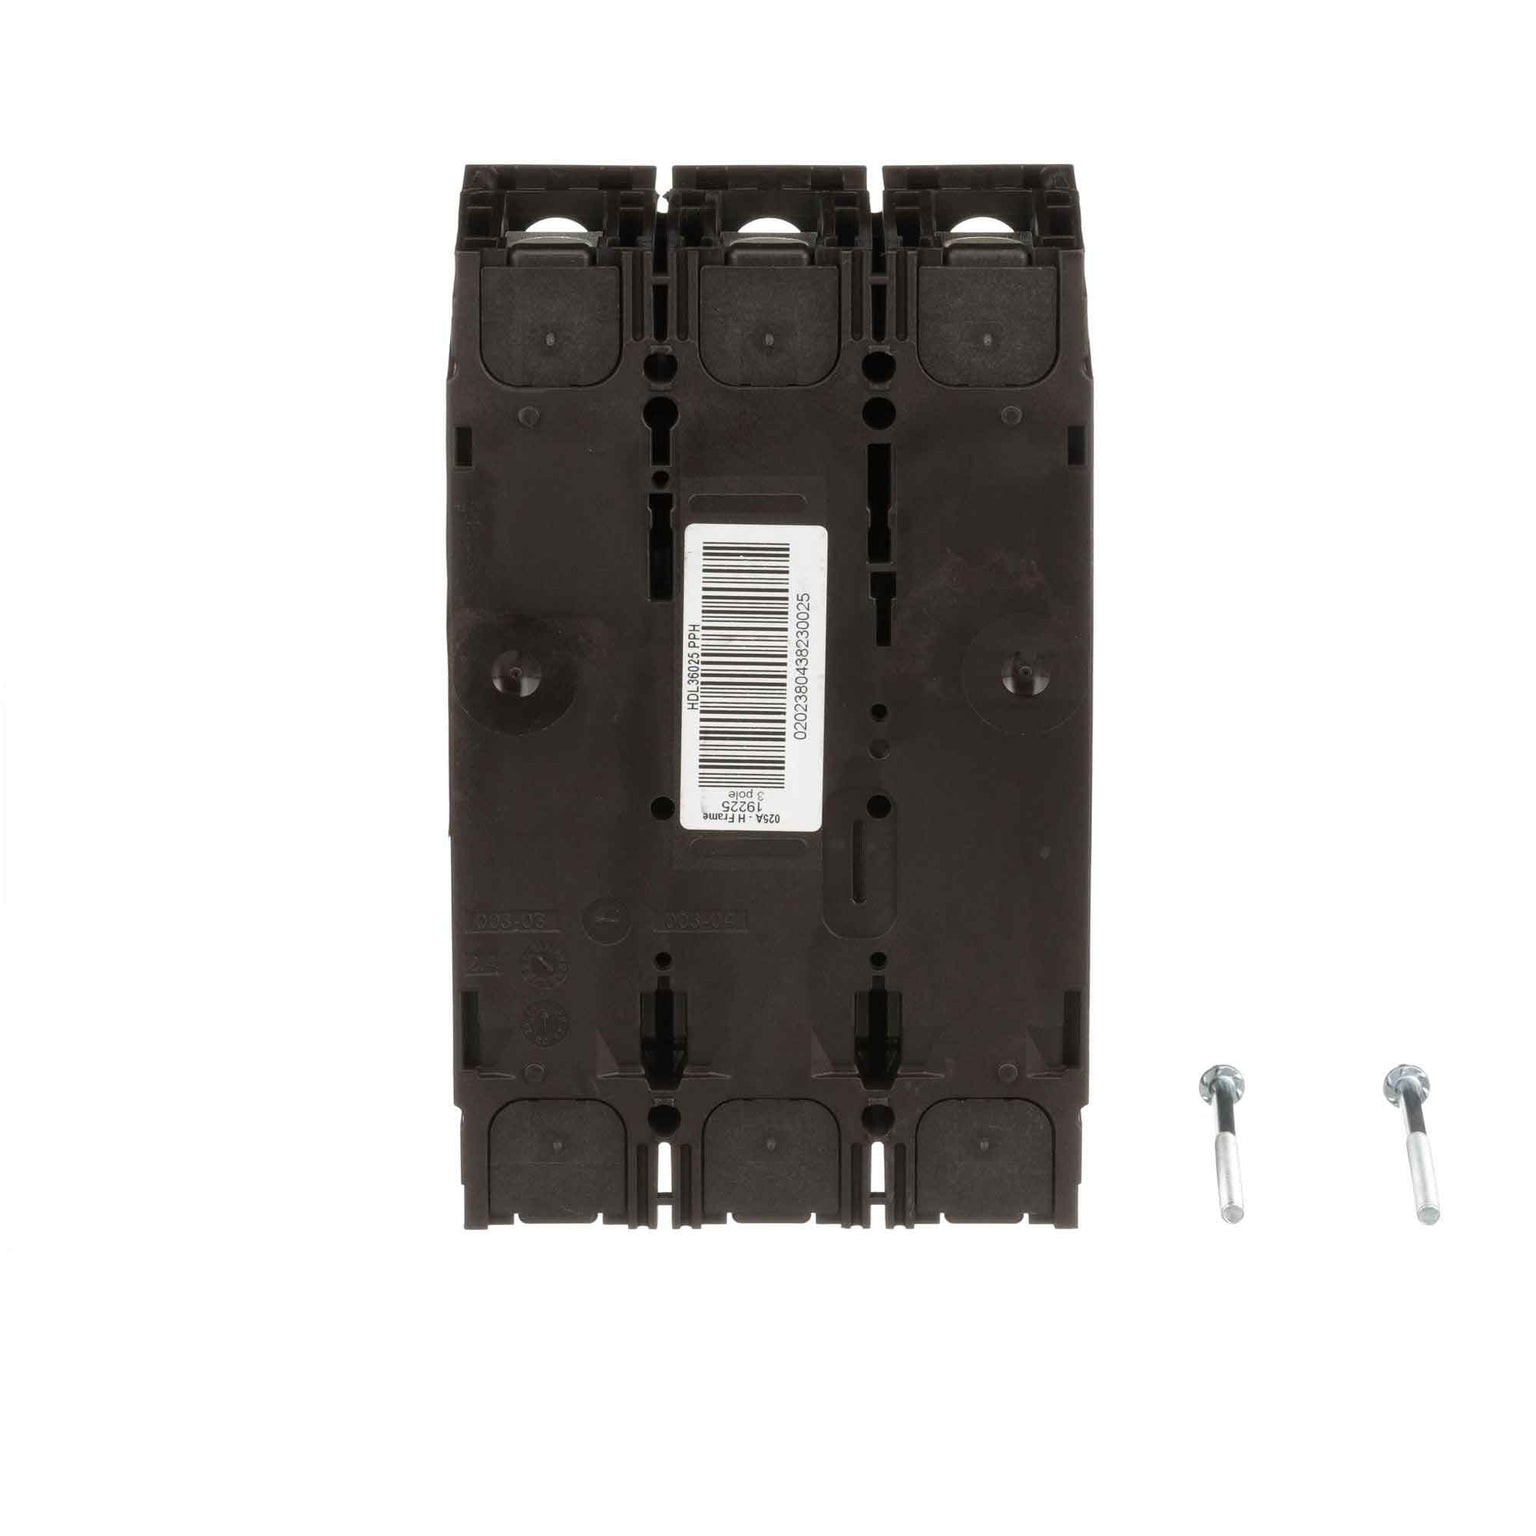 HDL36025 - Square D - Molded Case Circuit Breakers